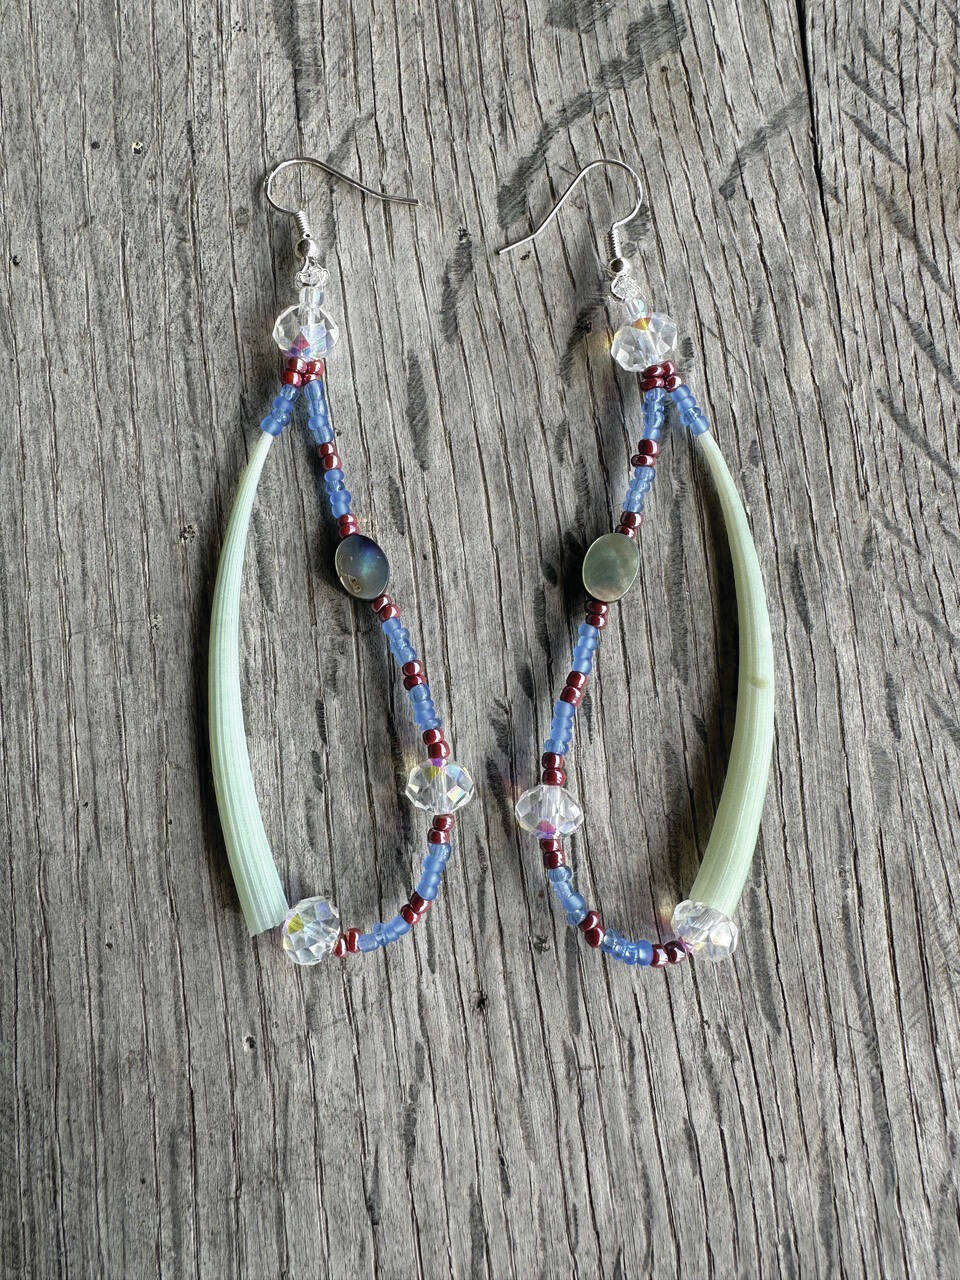 Photo provide by Bunnell Street Arts Center
Beaded earrings by Winter Marshall, one of six items in Bunnell’s 2023 CSA art boxes.